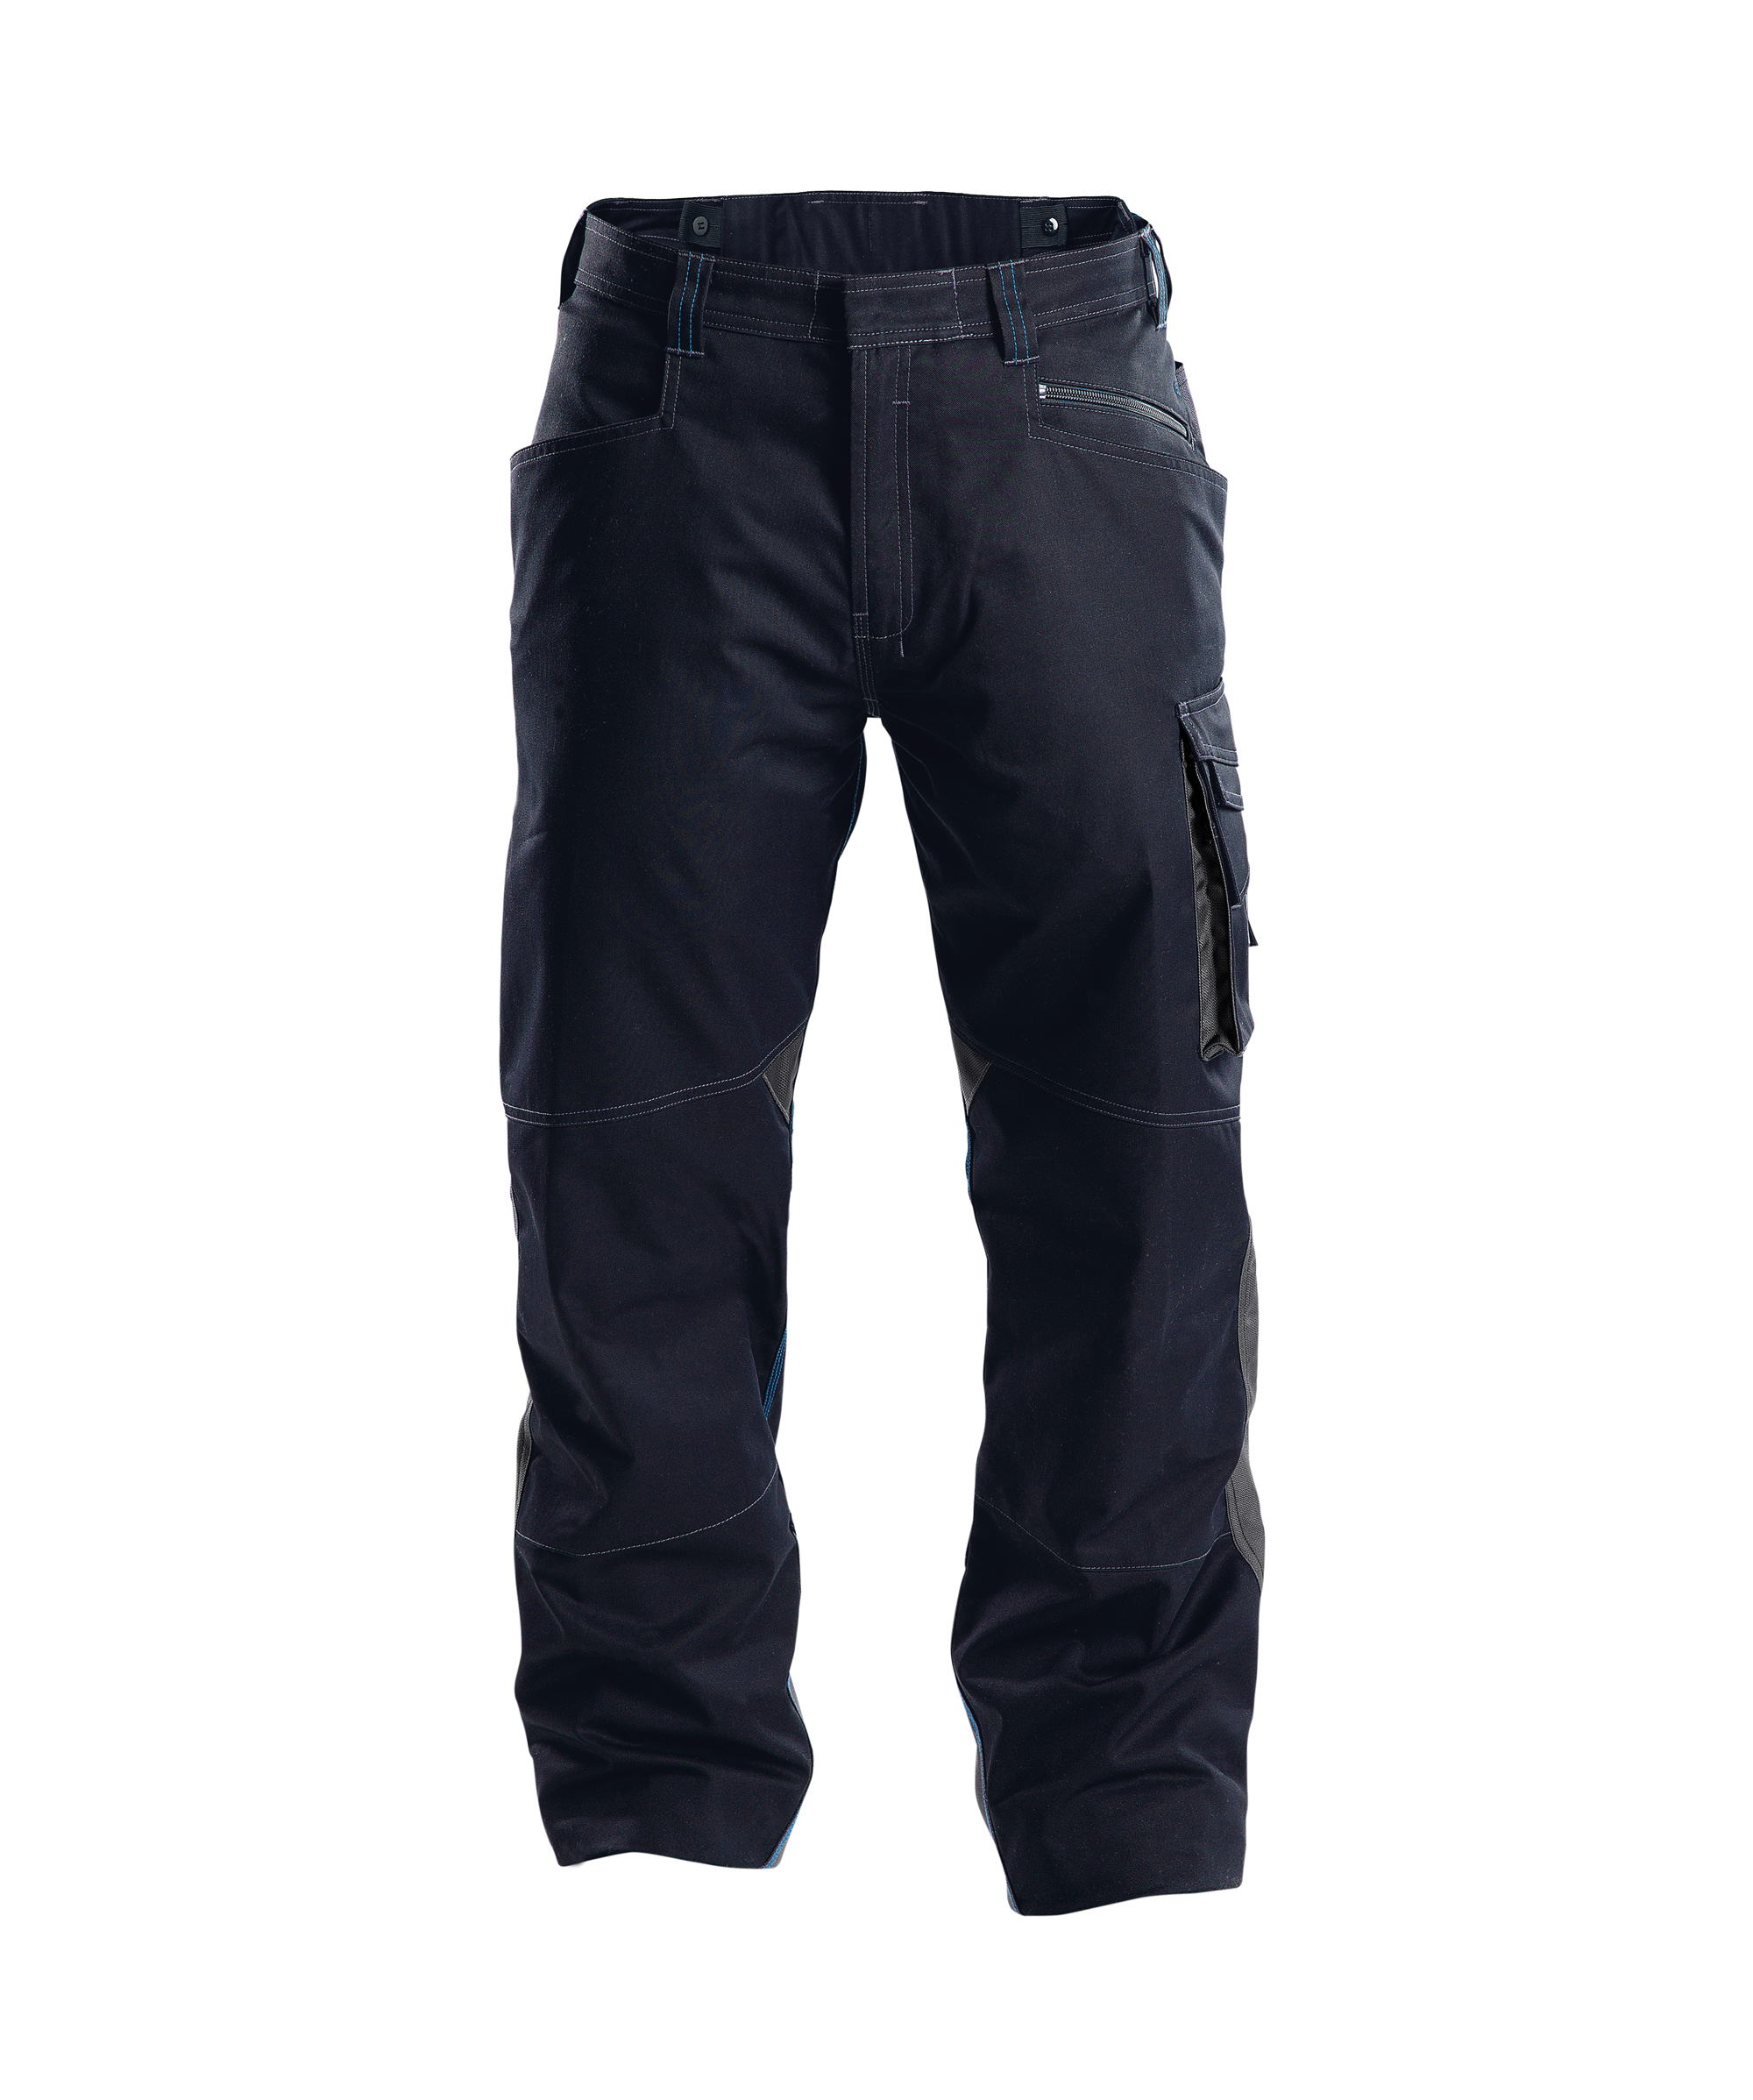 spectrum_two-tone-work-trousers_midnight-blue-anthracite-grey_front.jpg